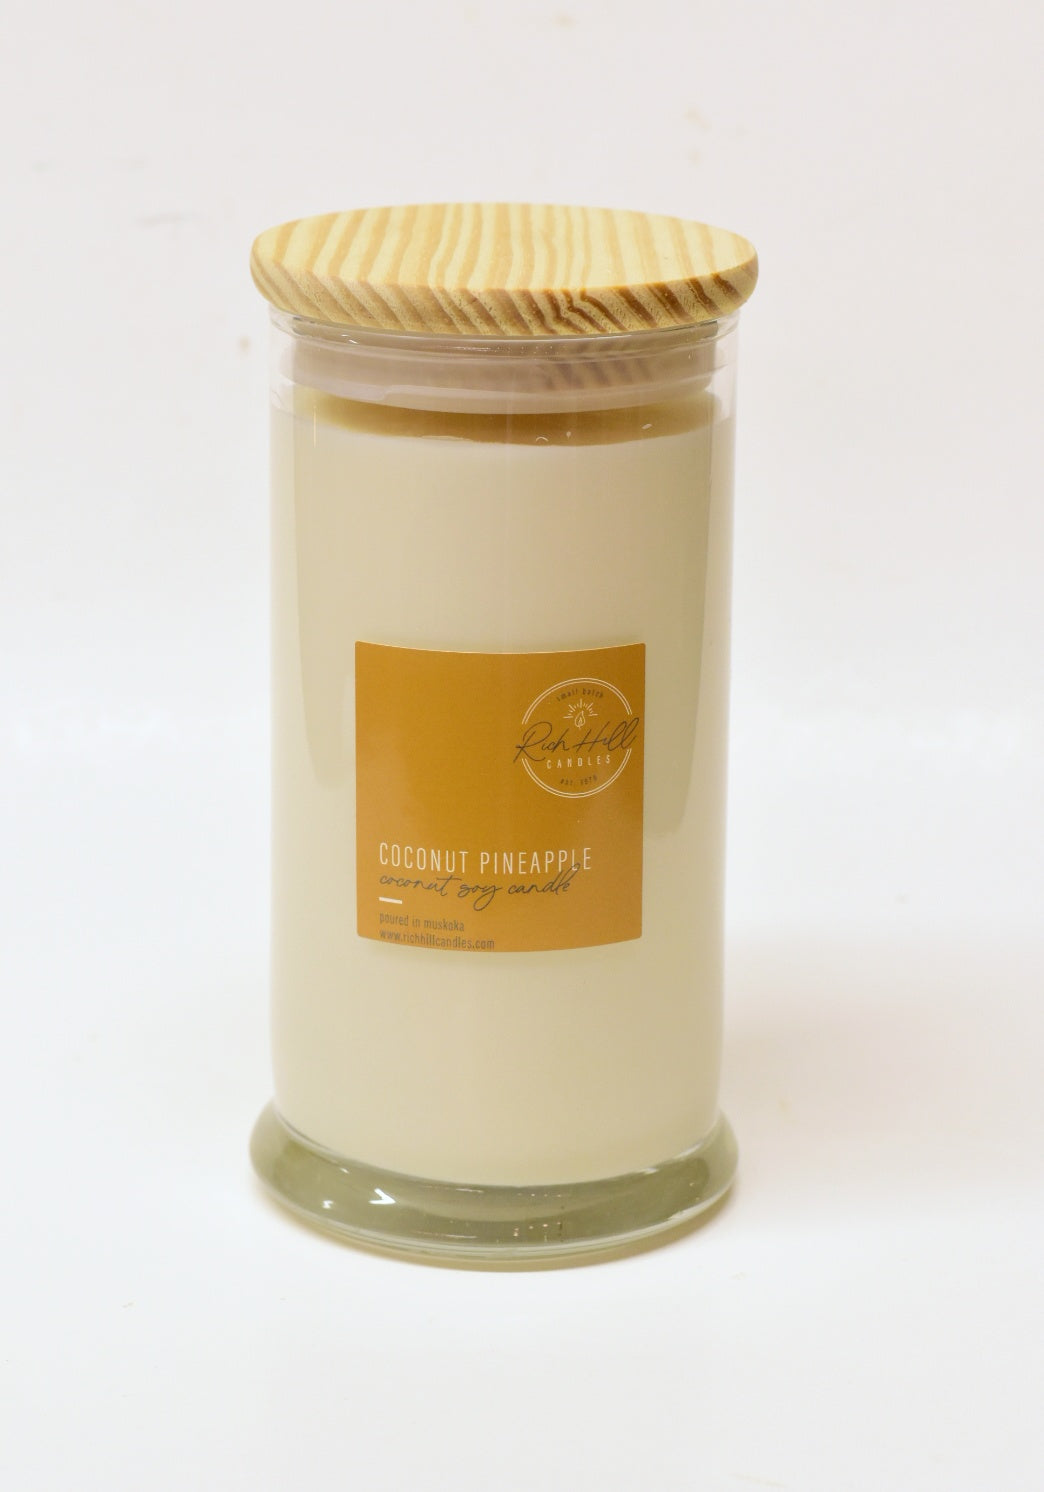 Coconut & Pineapple Coconut Soy Scented Jars